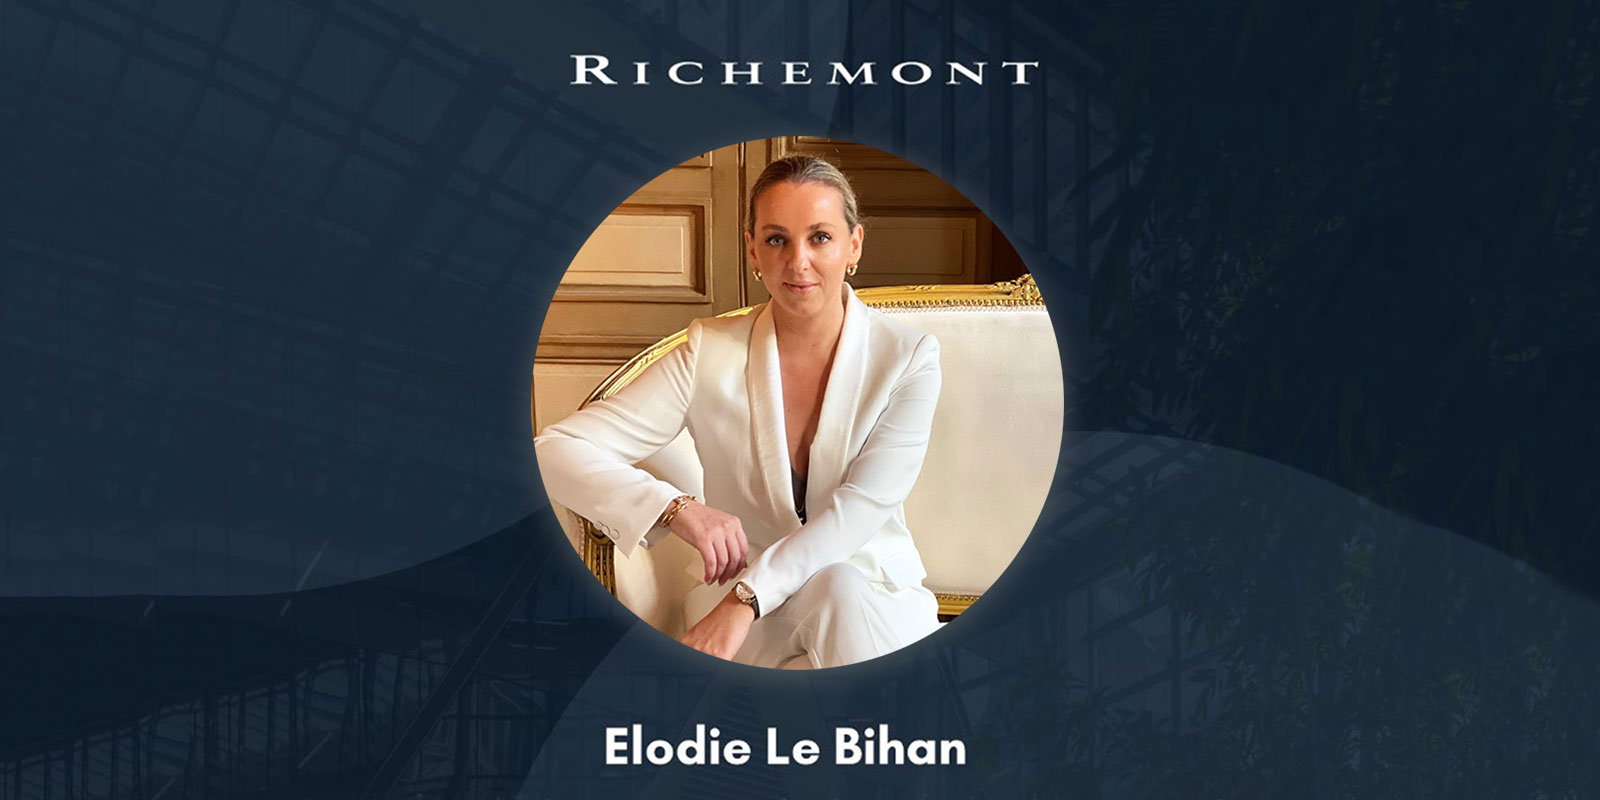 Career Talk by Richemont: Insights into Managing a Luxury Brand Across Cultures